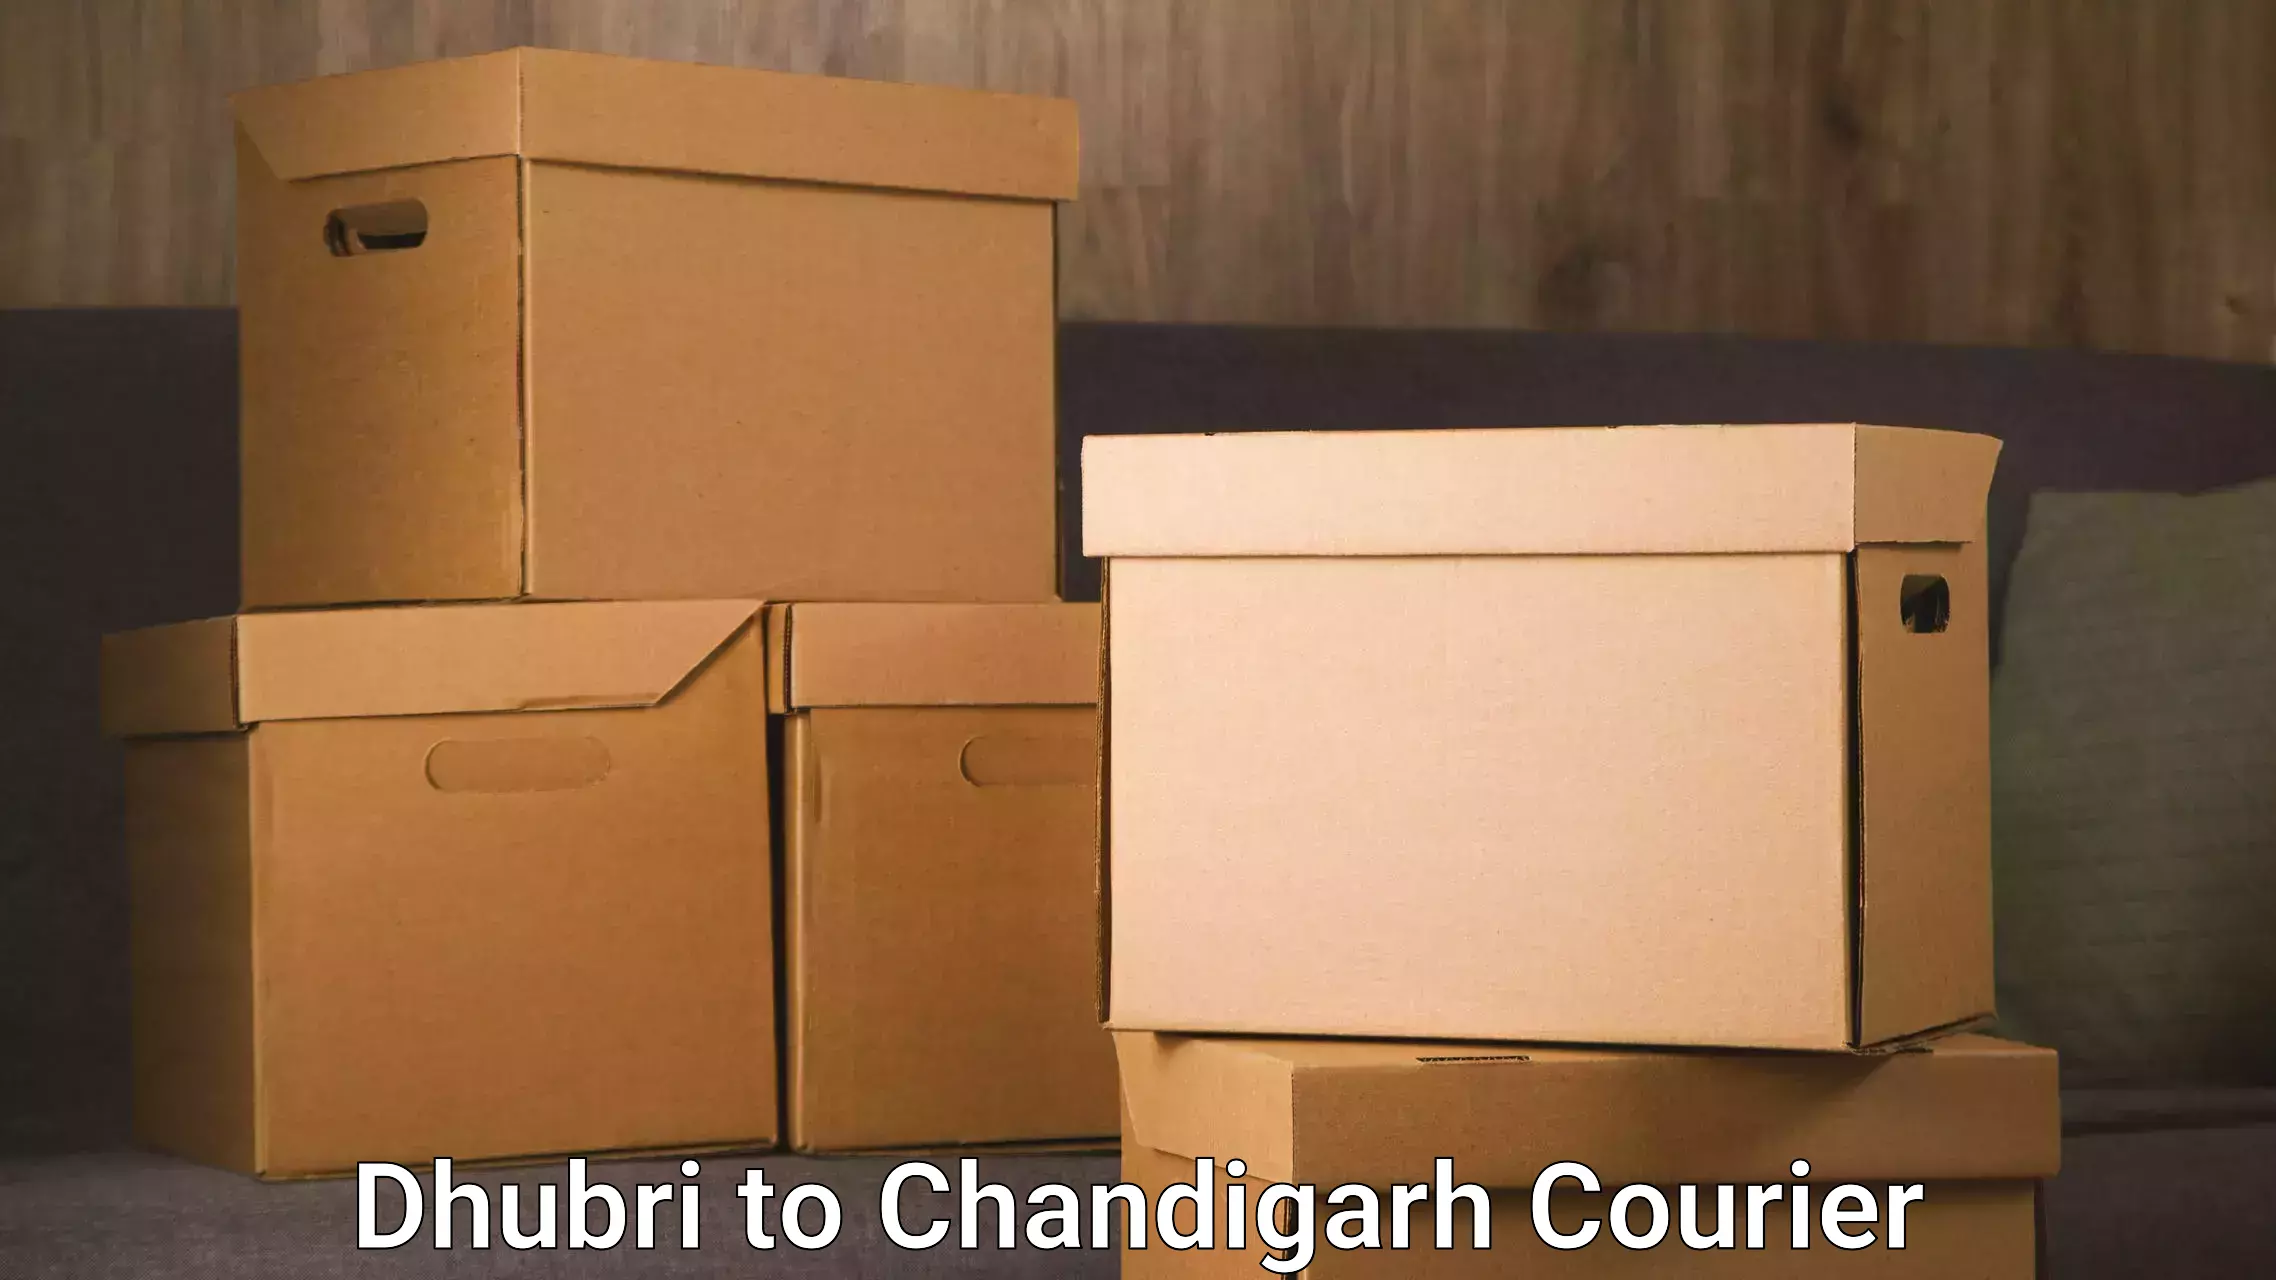 24-hour courier service Dhubri to Chandigarh